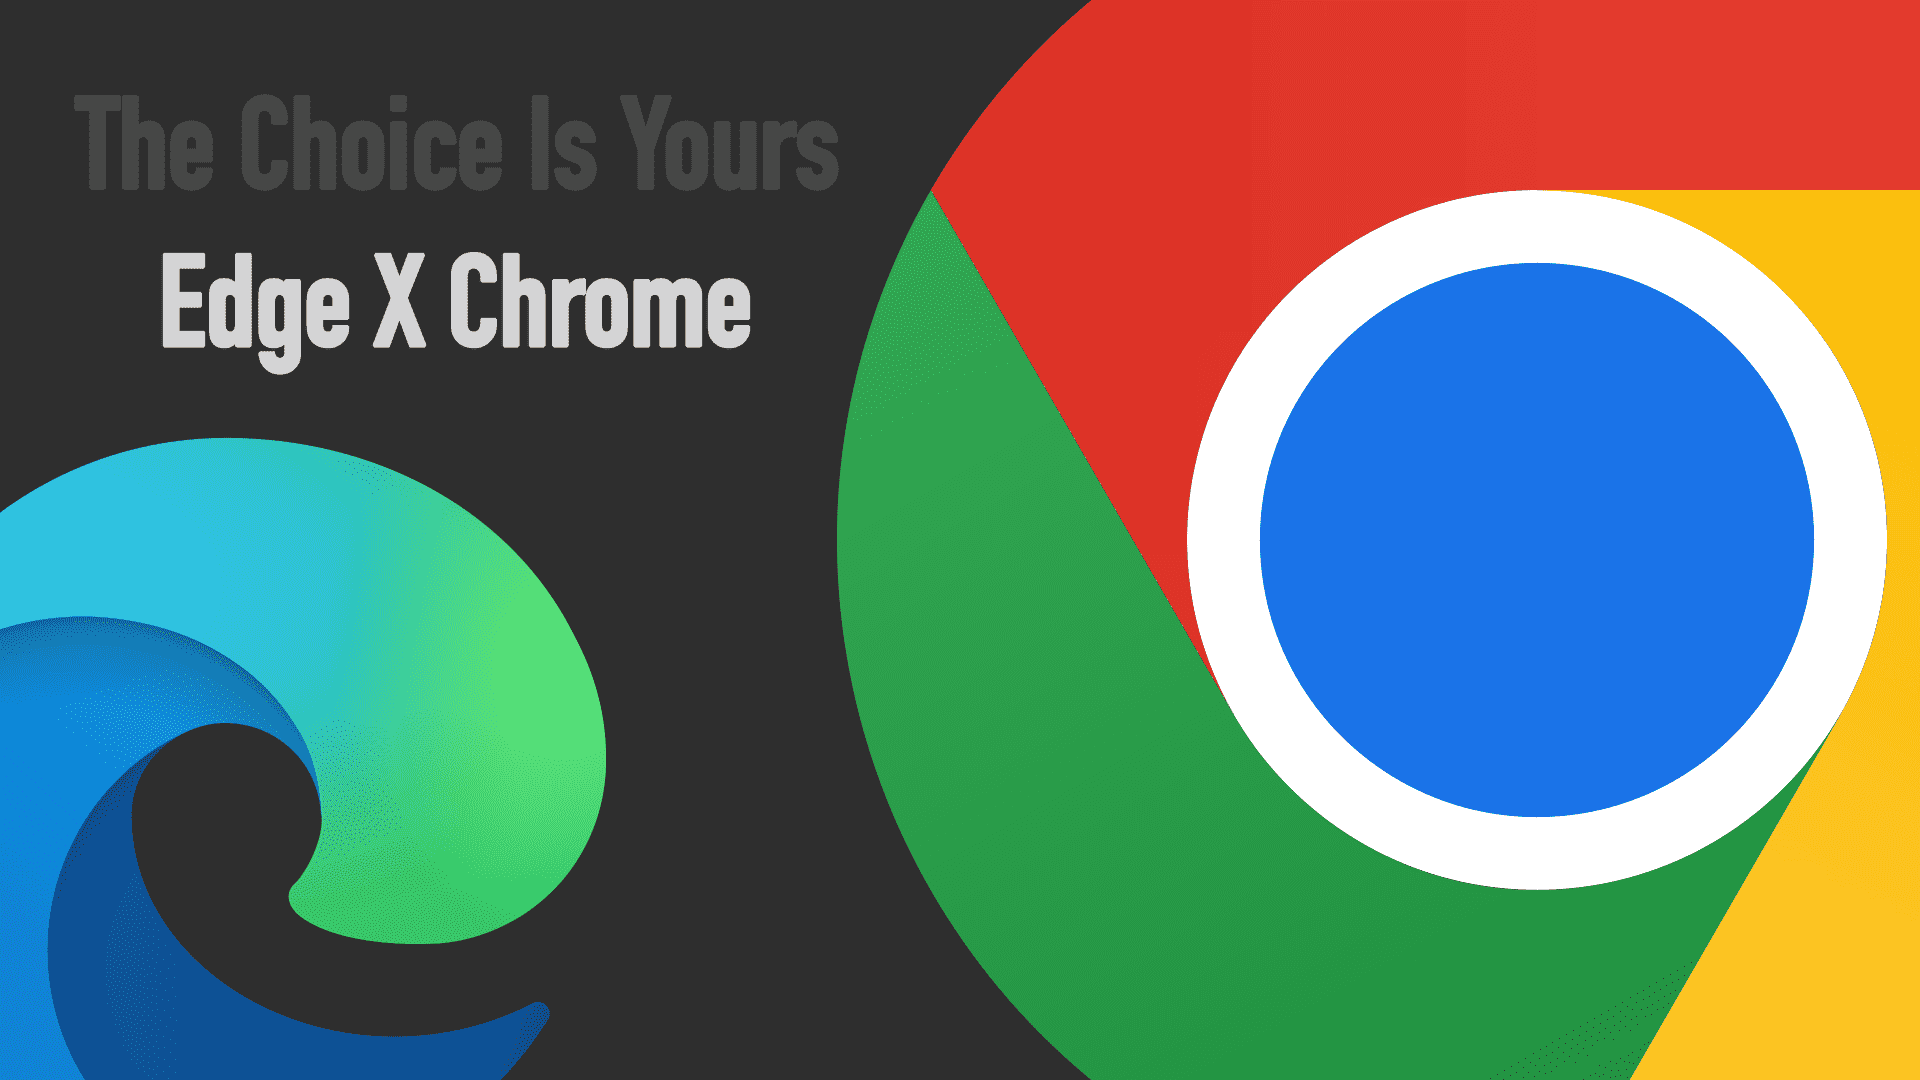 Following encouragement to use Microsoft Edge, I am moving some users back to Google Chrome